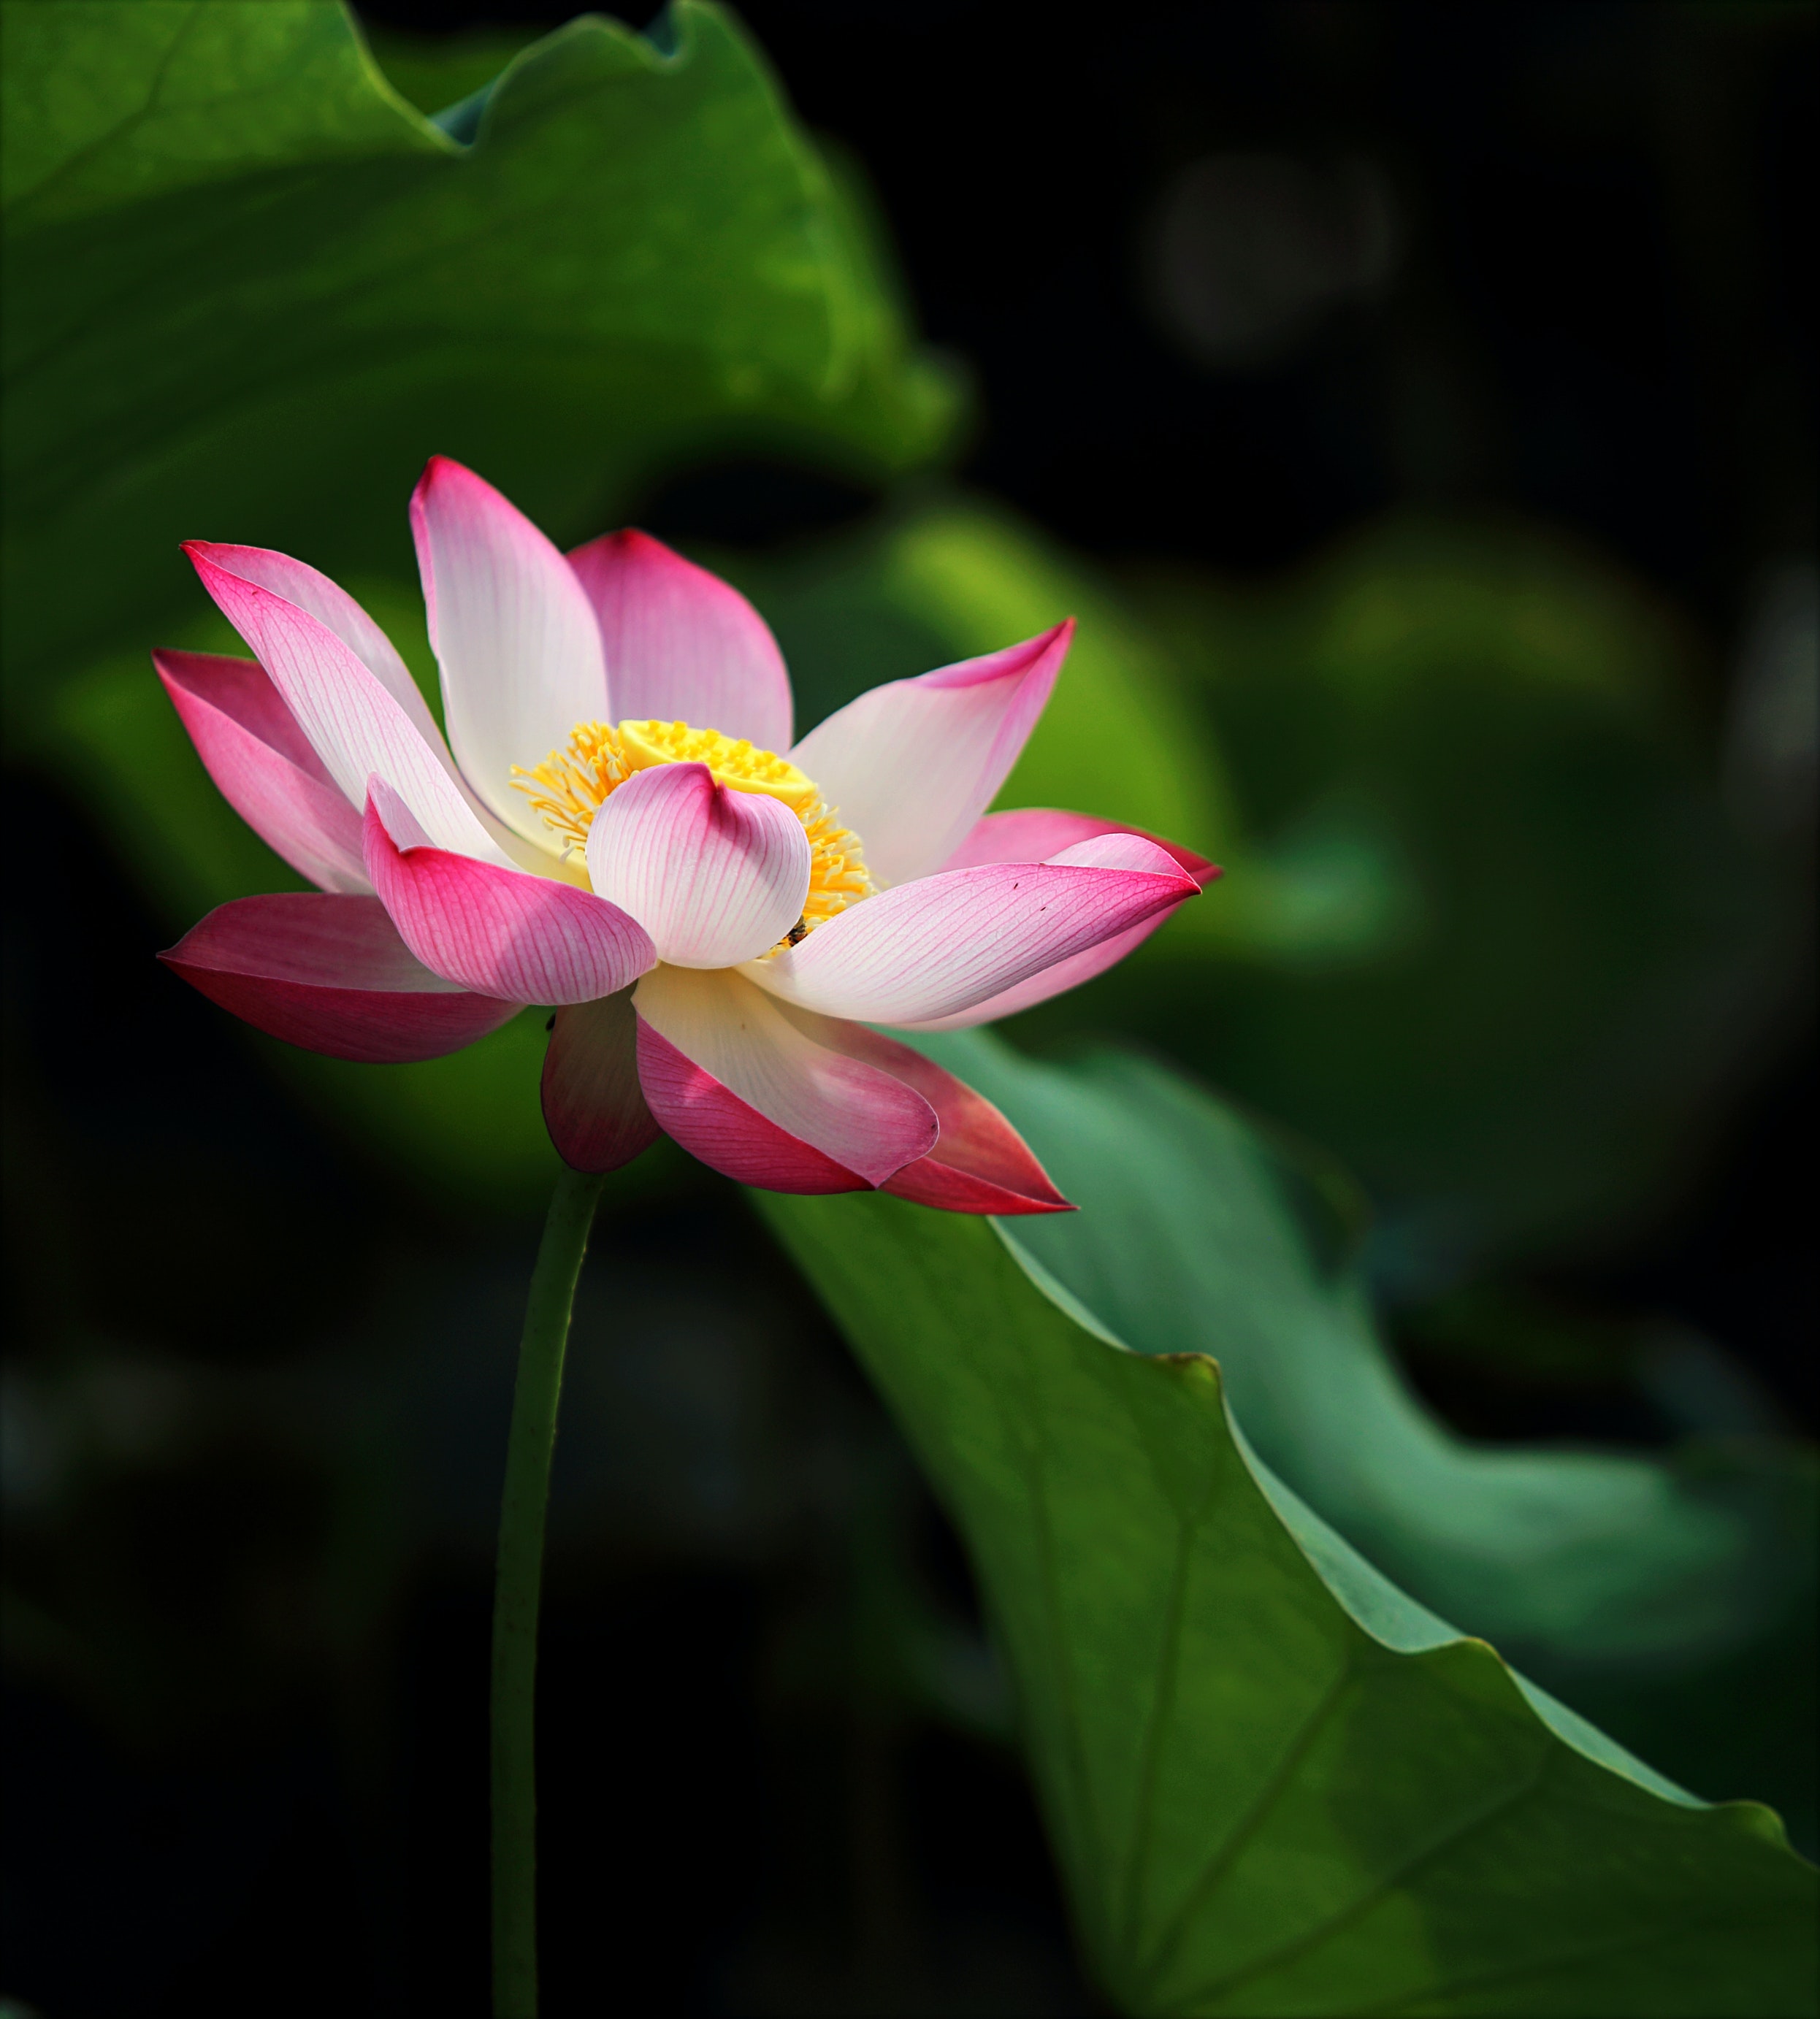 Lotus flower photos download the best free lotus flower stock photos hd images